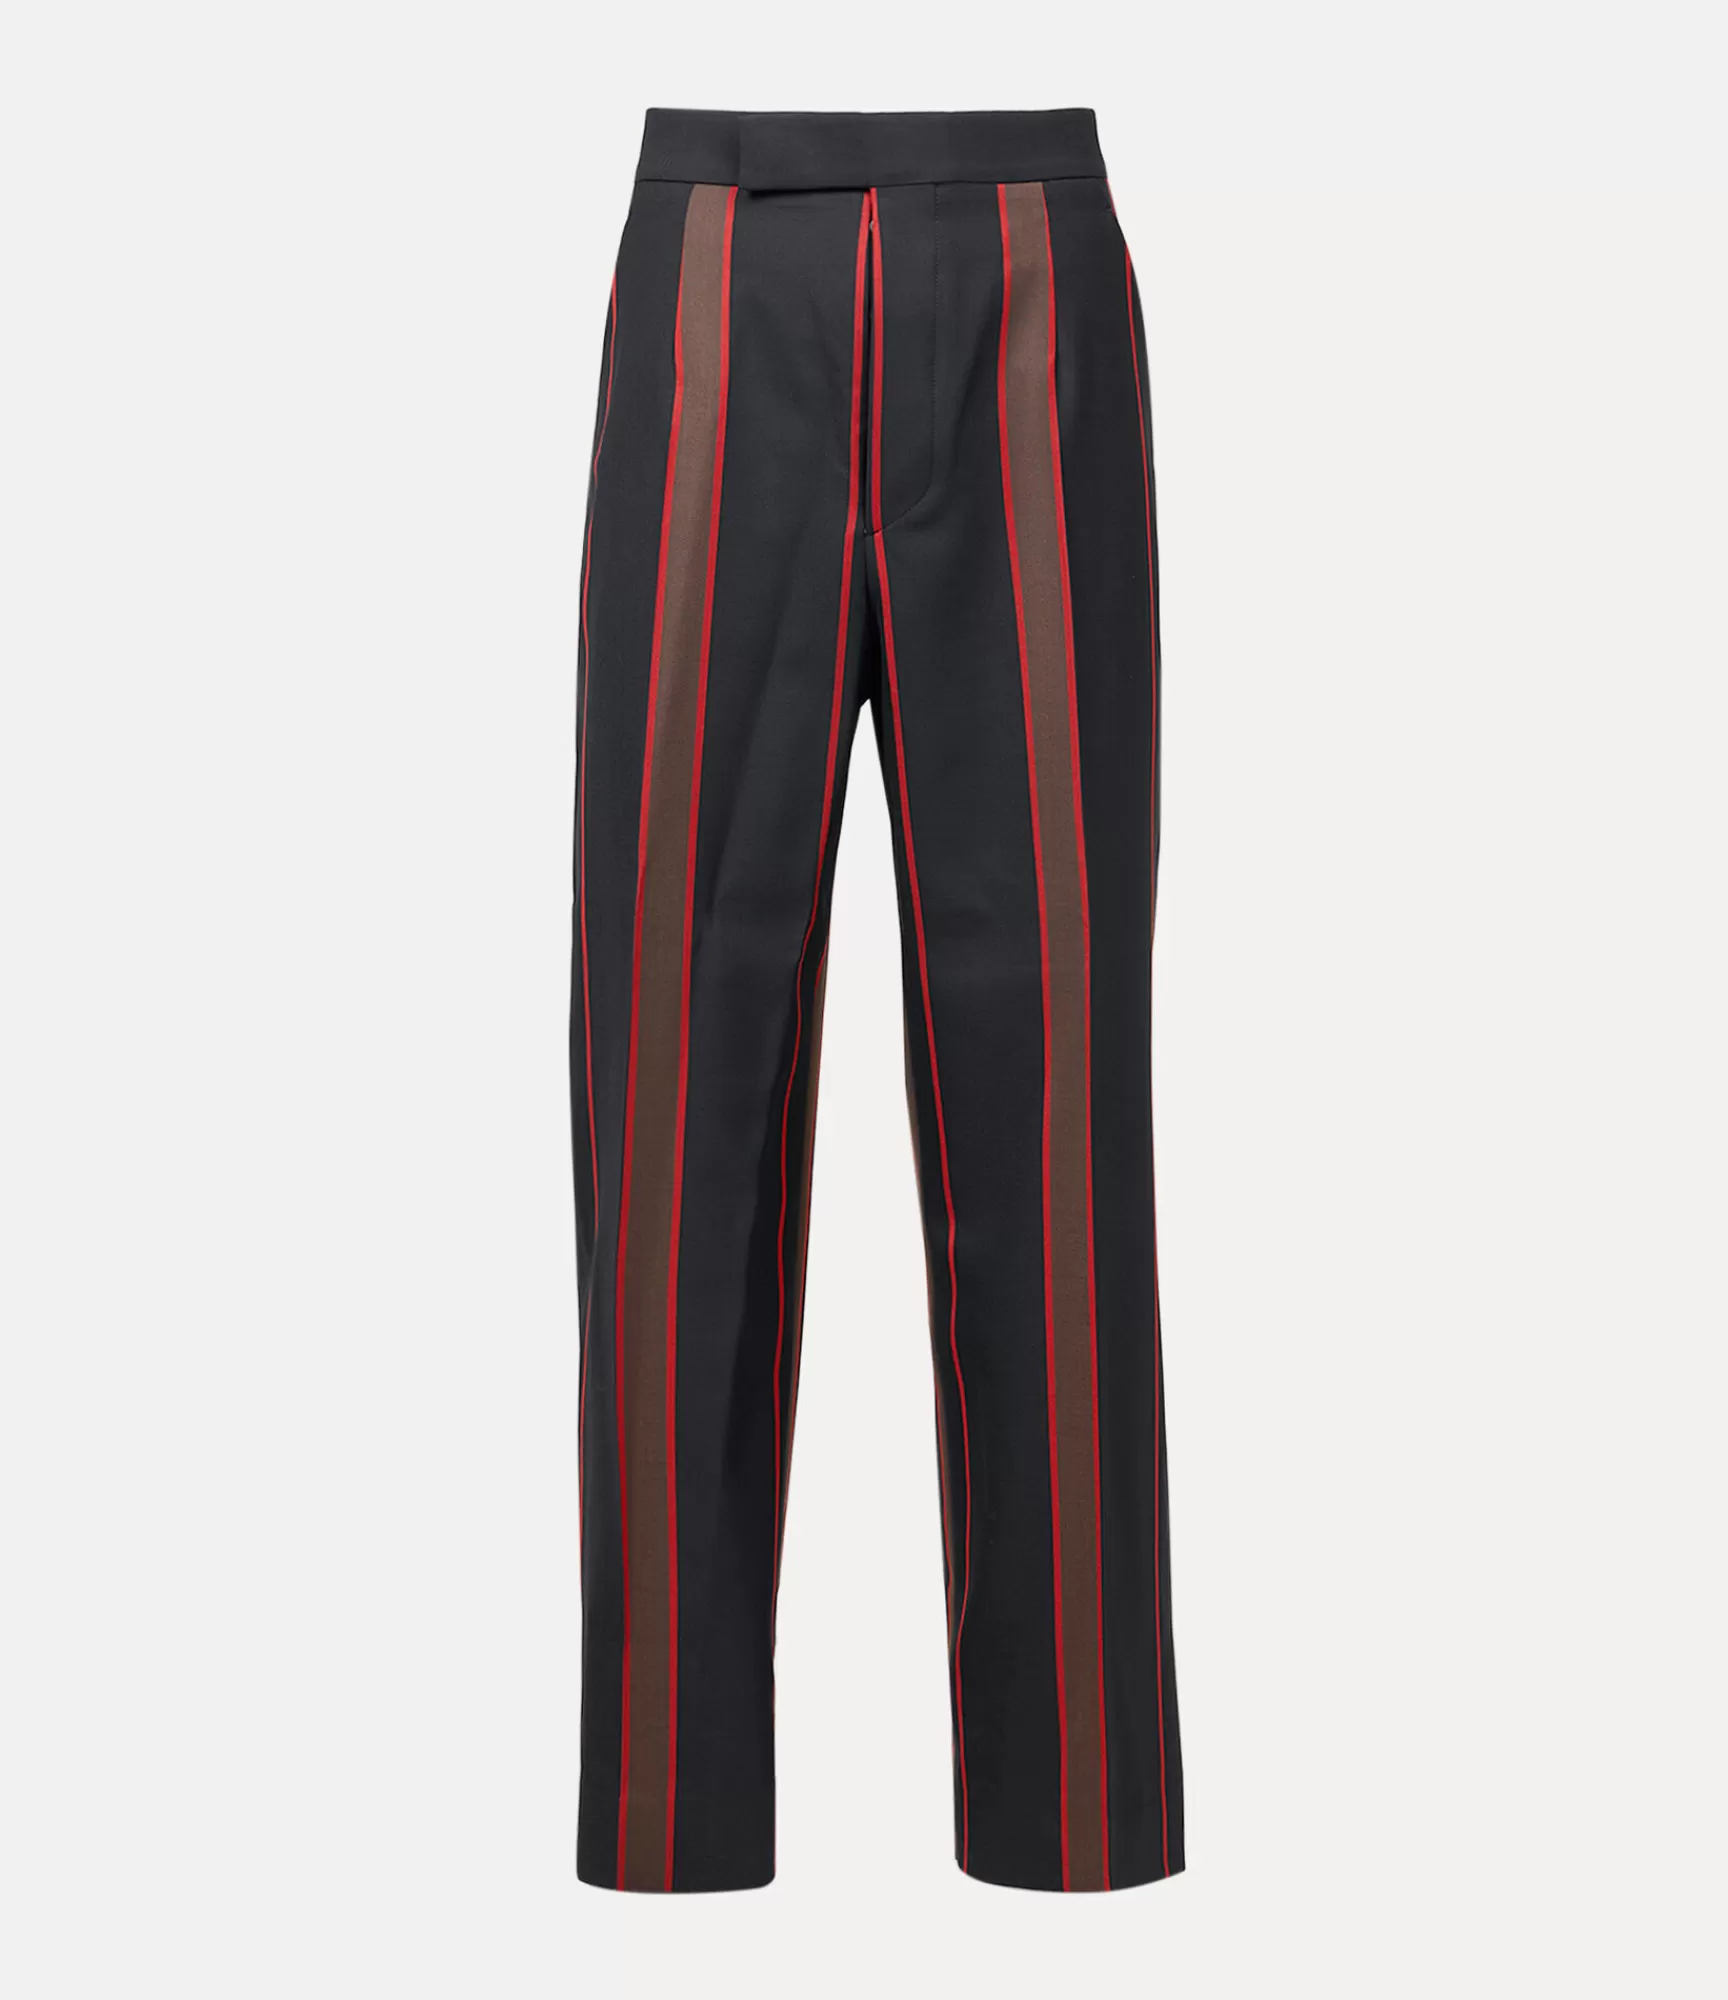 Vivienne Westwood Trousers and Shorts*Humphrey trousers Black Stripe